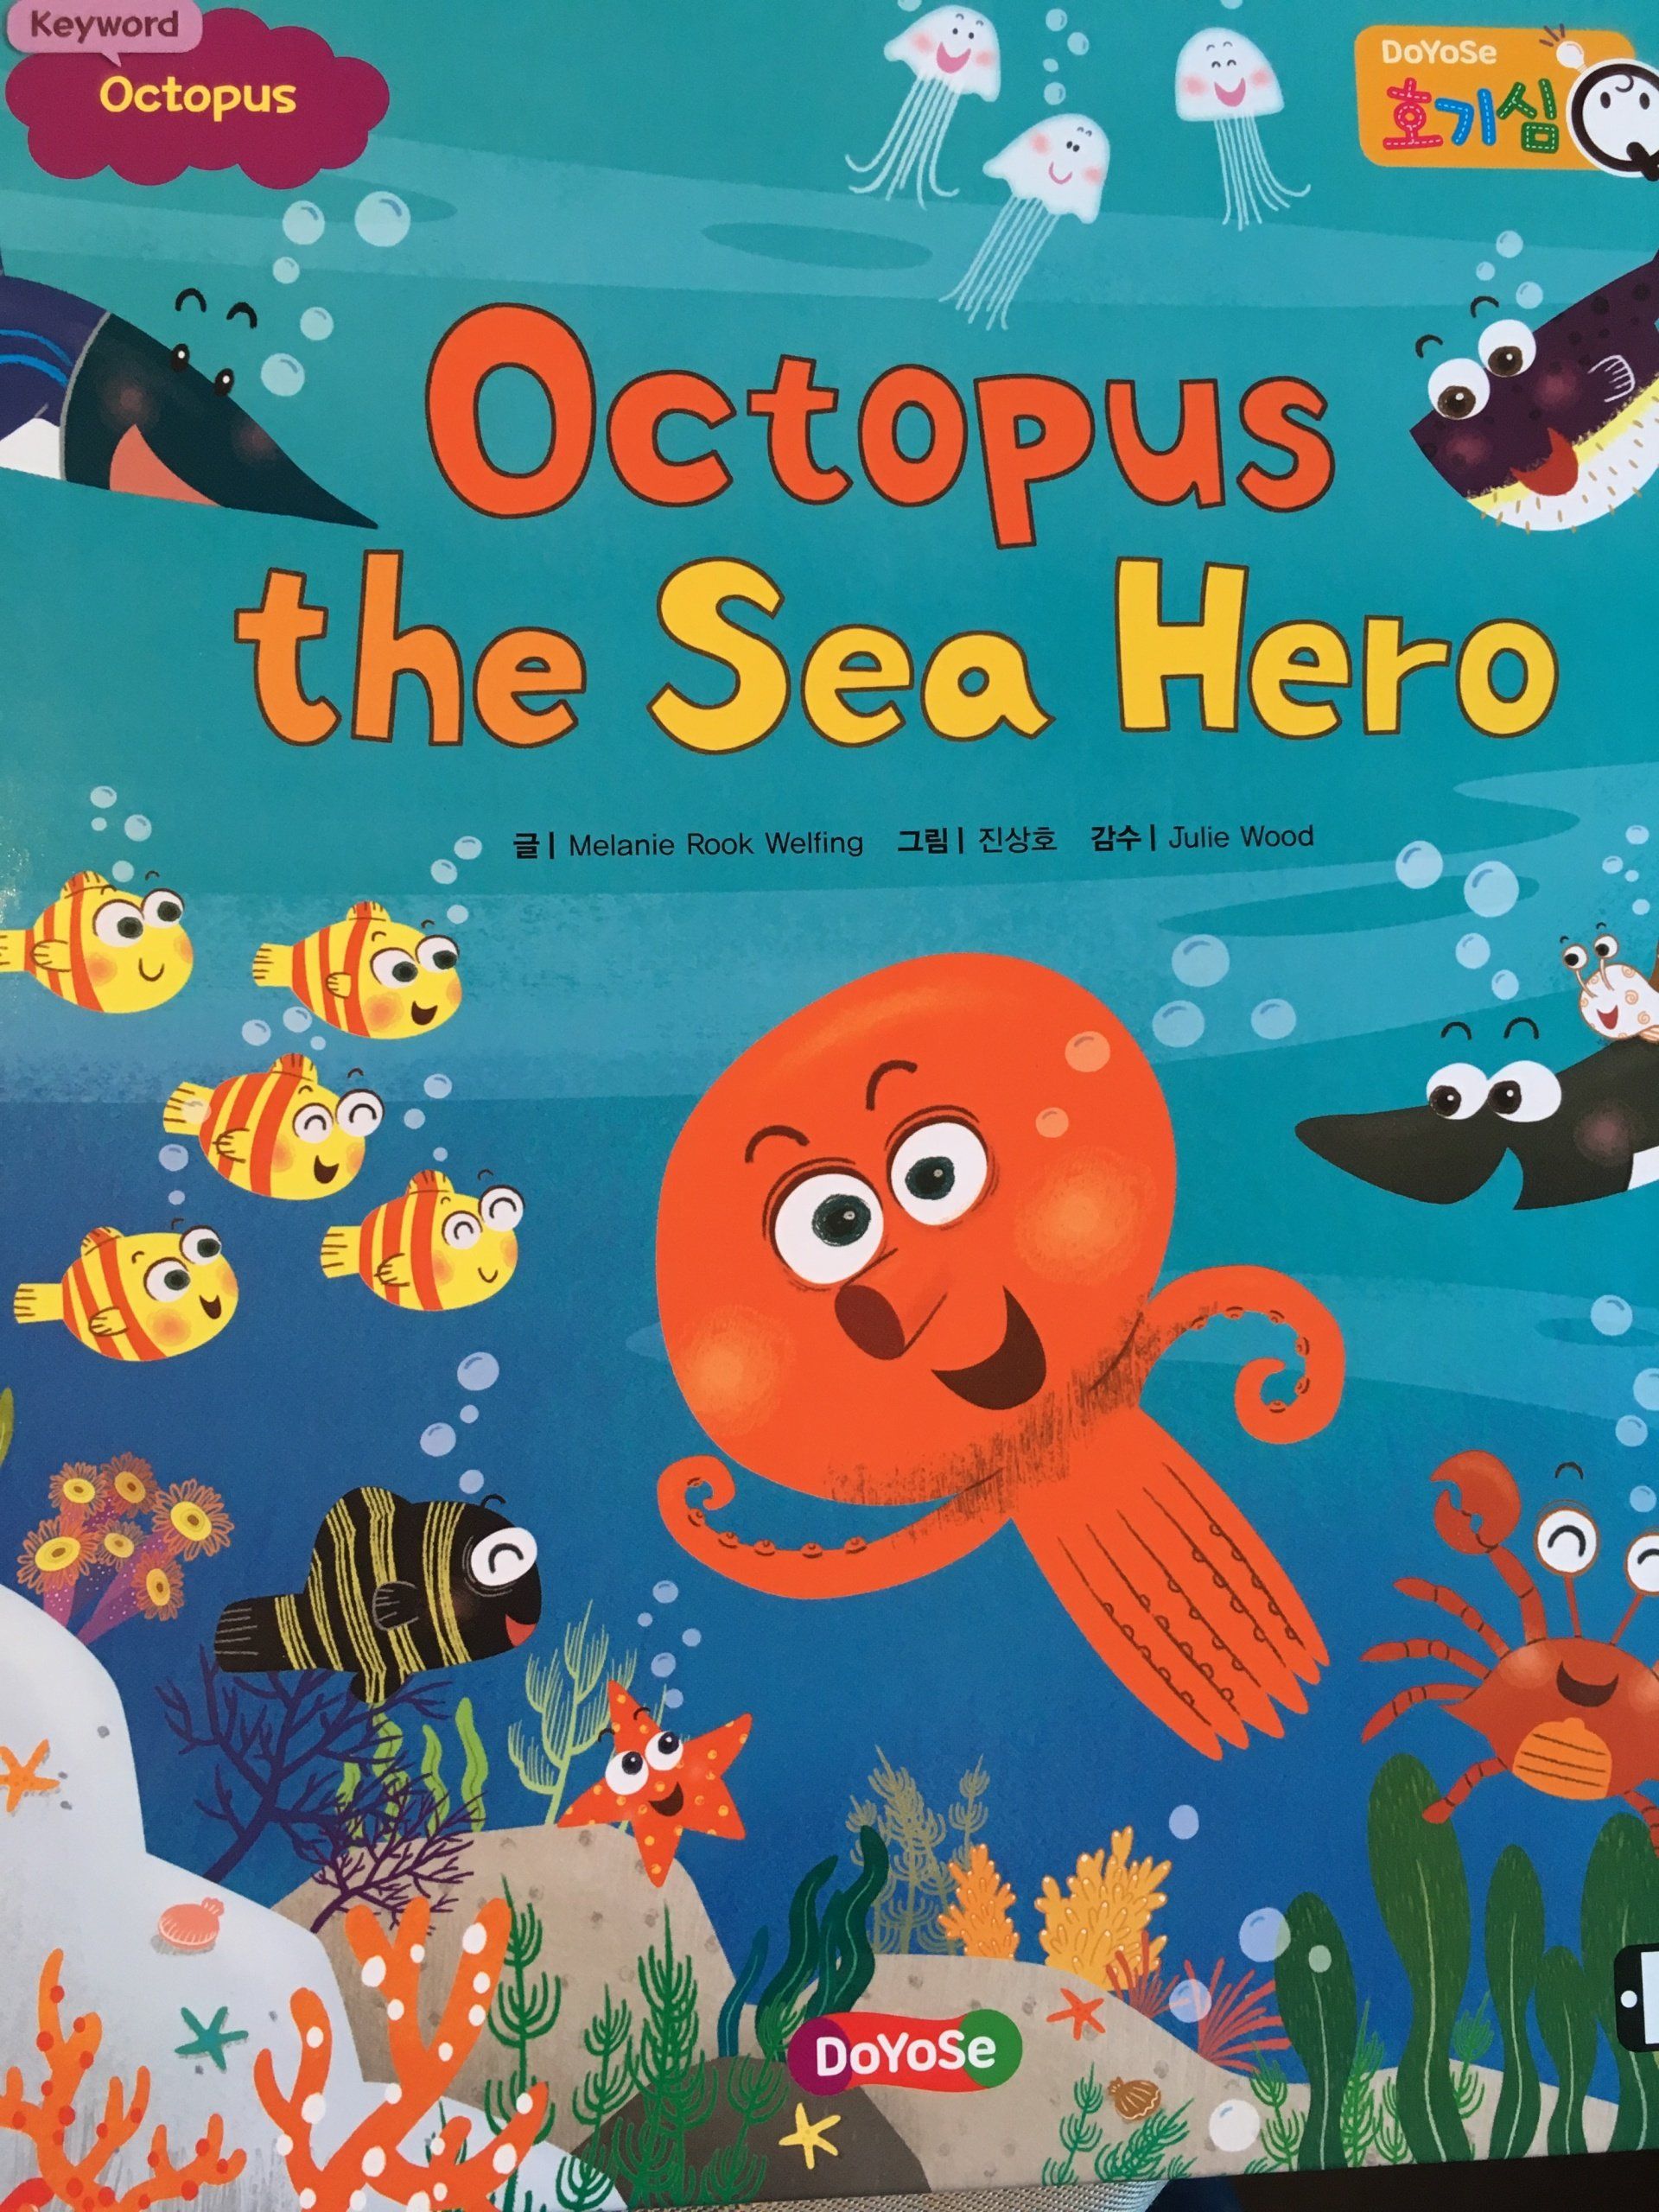 A picture of fish swimming in the sea with rocks and seaweed. An octopus cartoon is smiling and waving. Title: Octopus the Sea Hero by Melanie Rook Welfing.